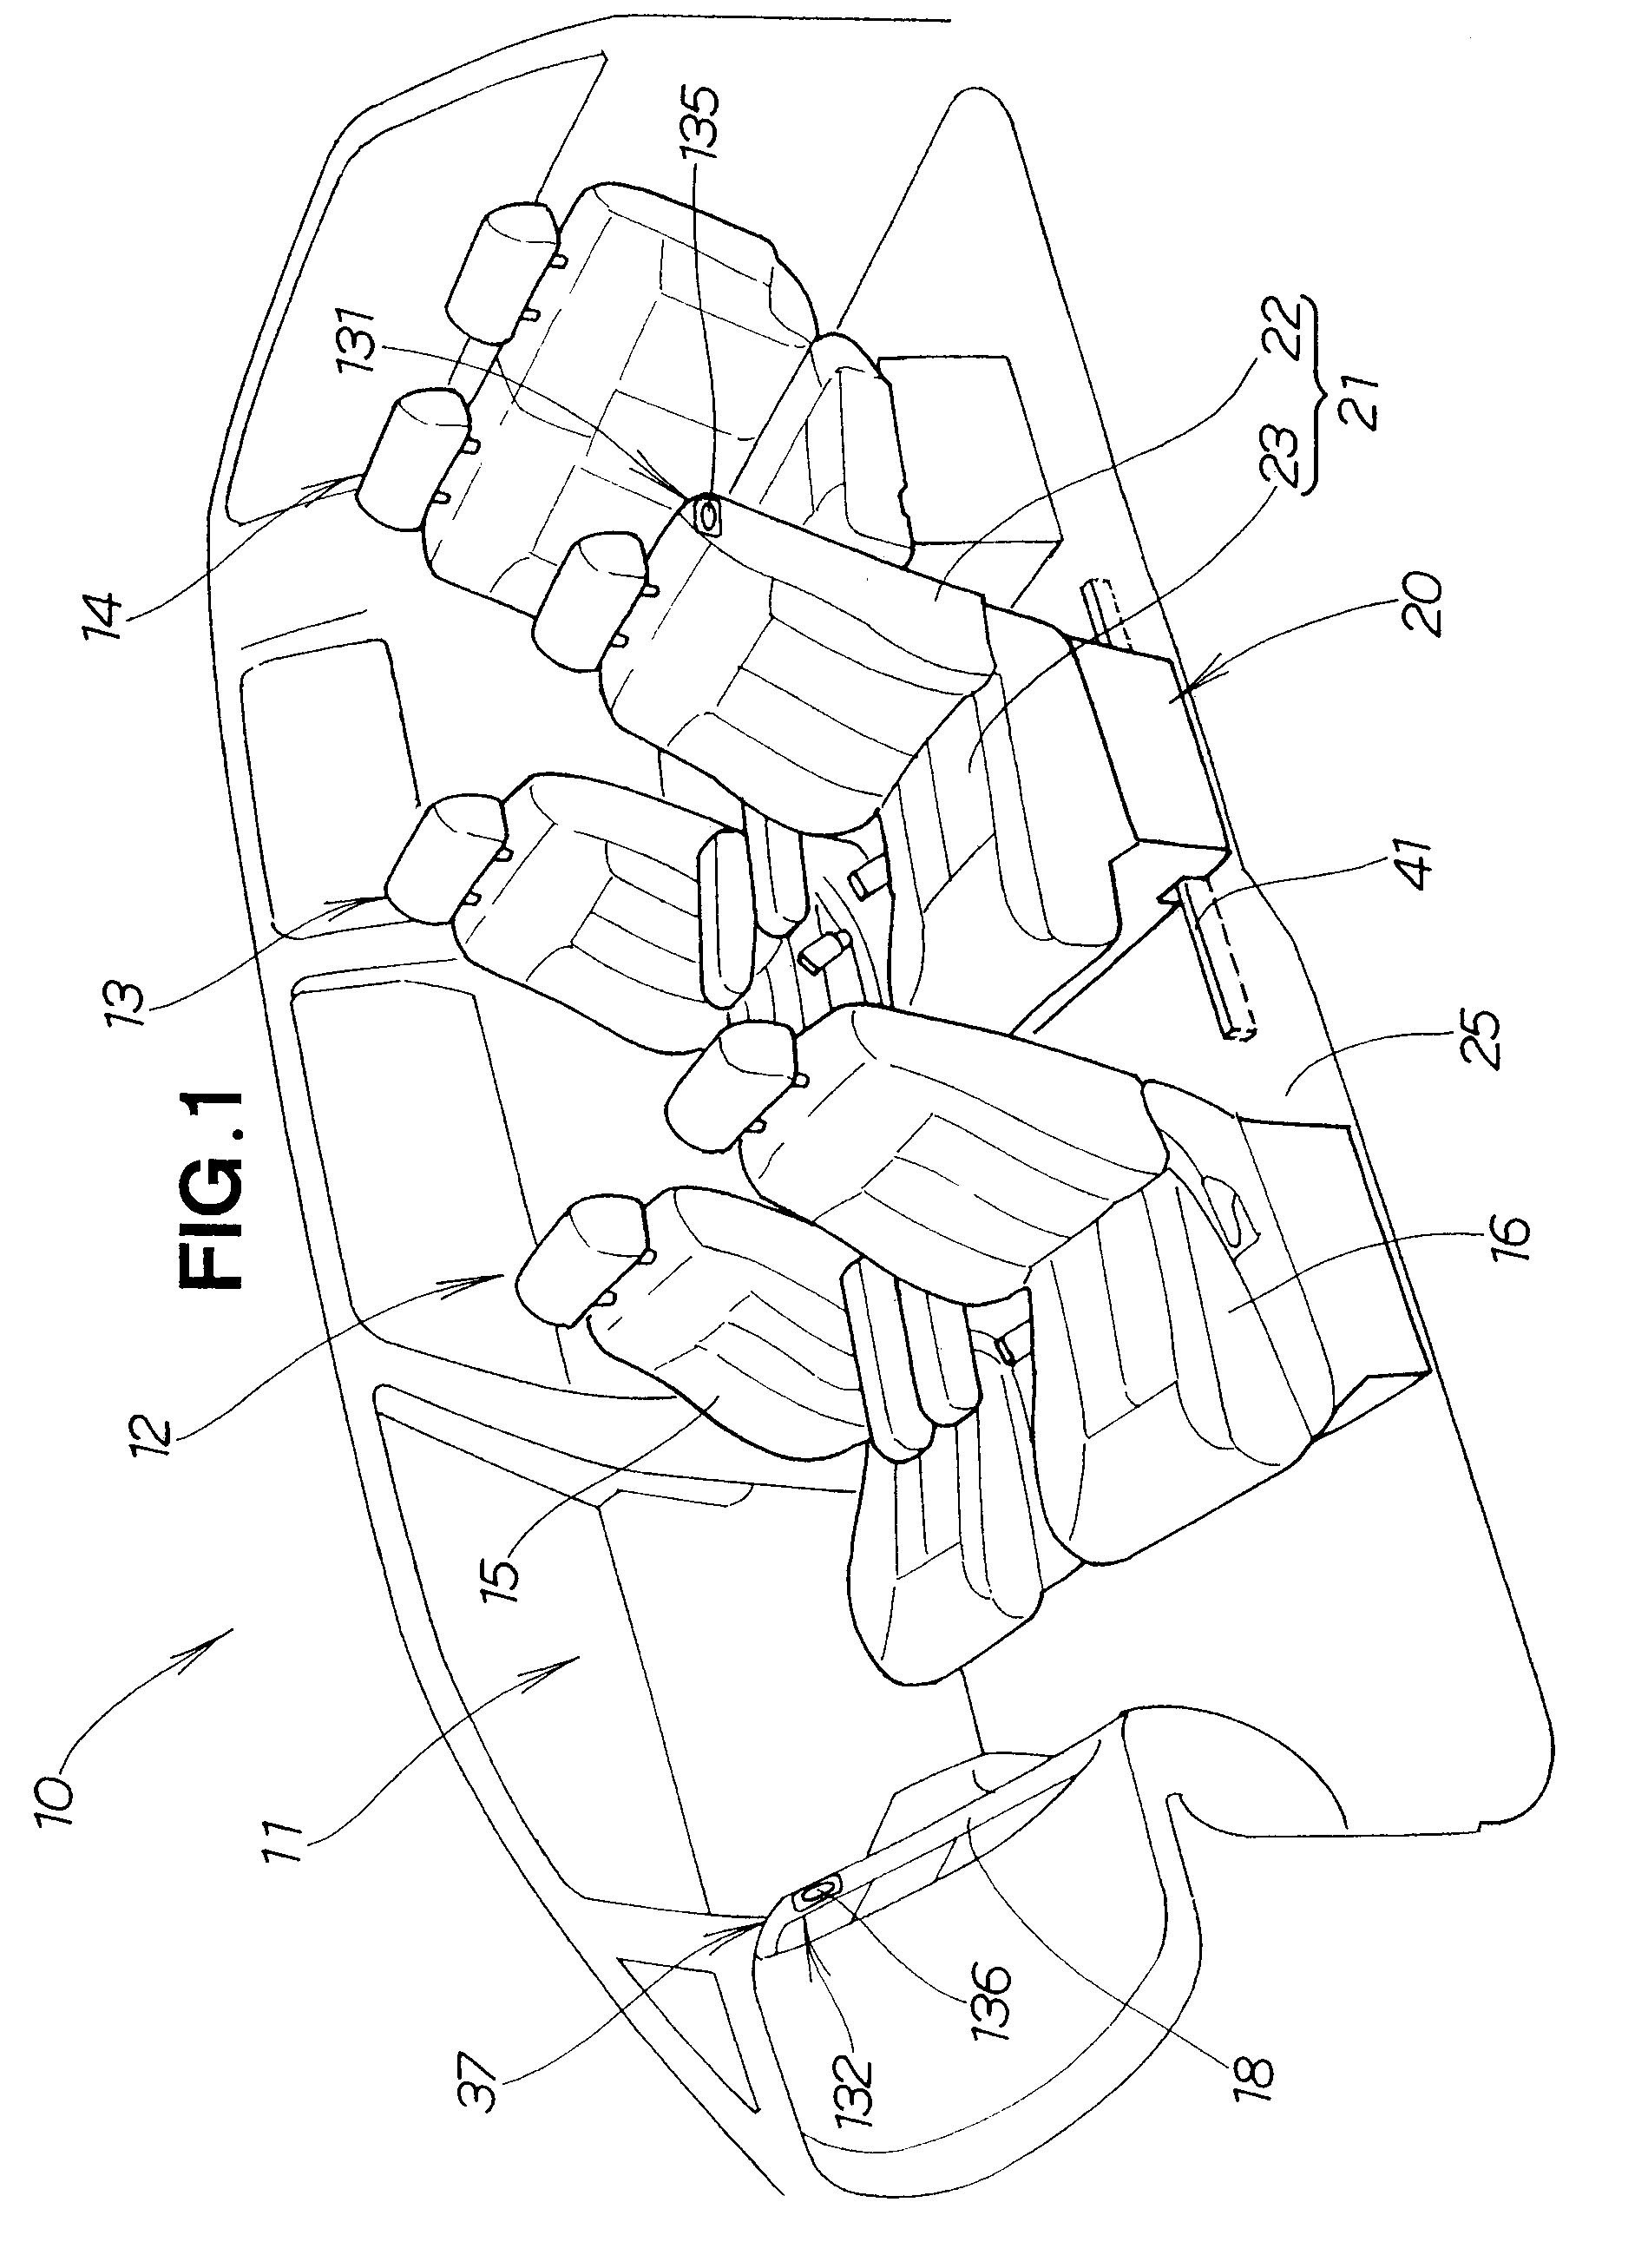 Folding seat apparatus for vehicle